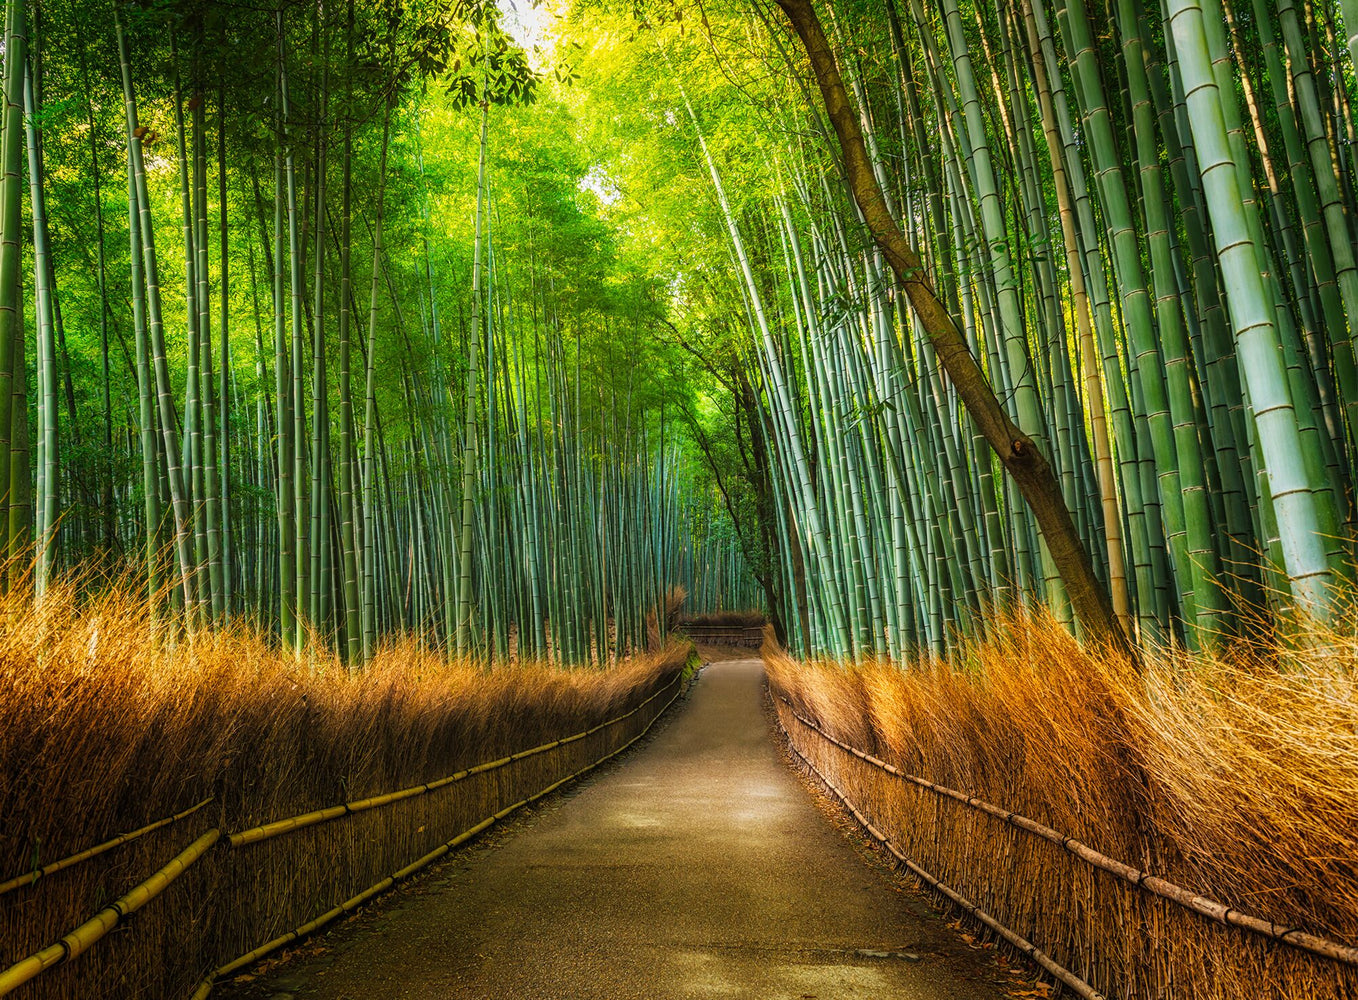 Bamboo Pathway Colour 3.15m x 2.32m 4 Piece Giant Wallpaper Wall Mural